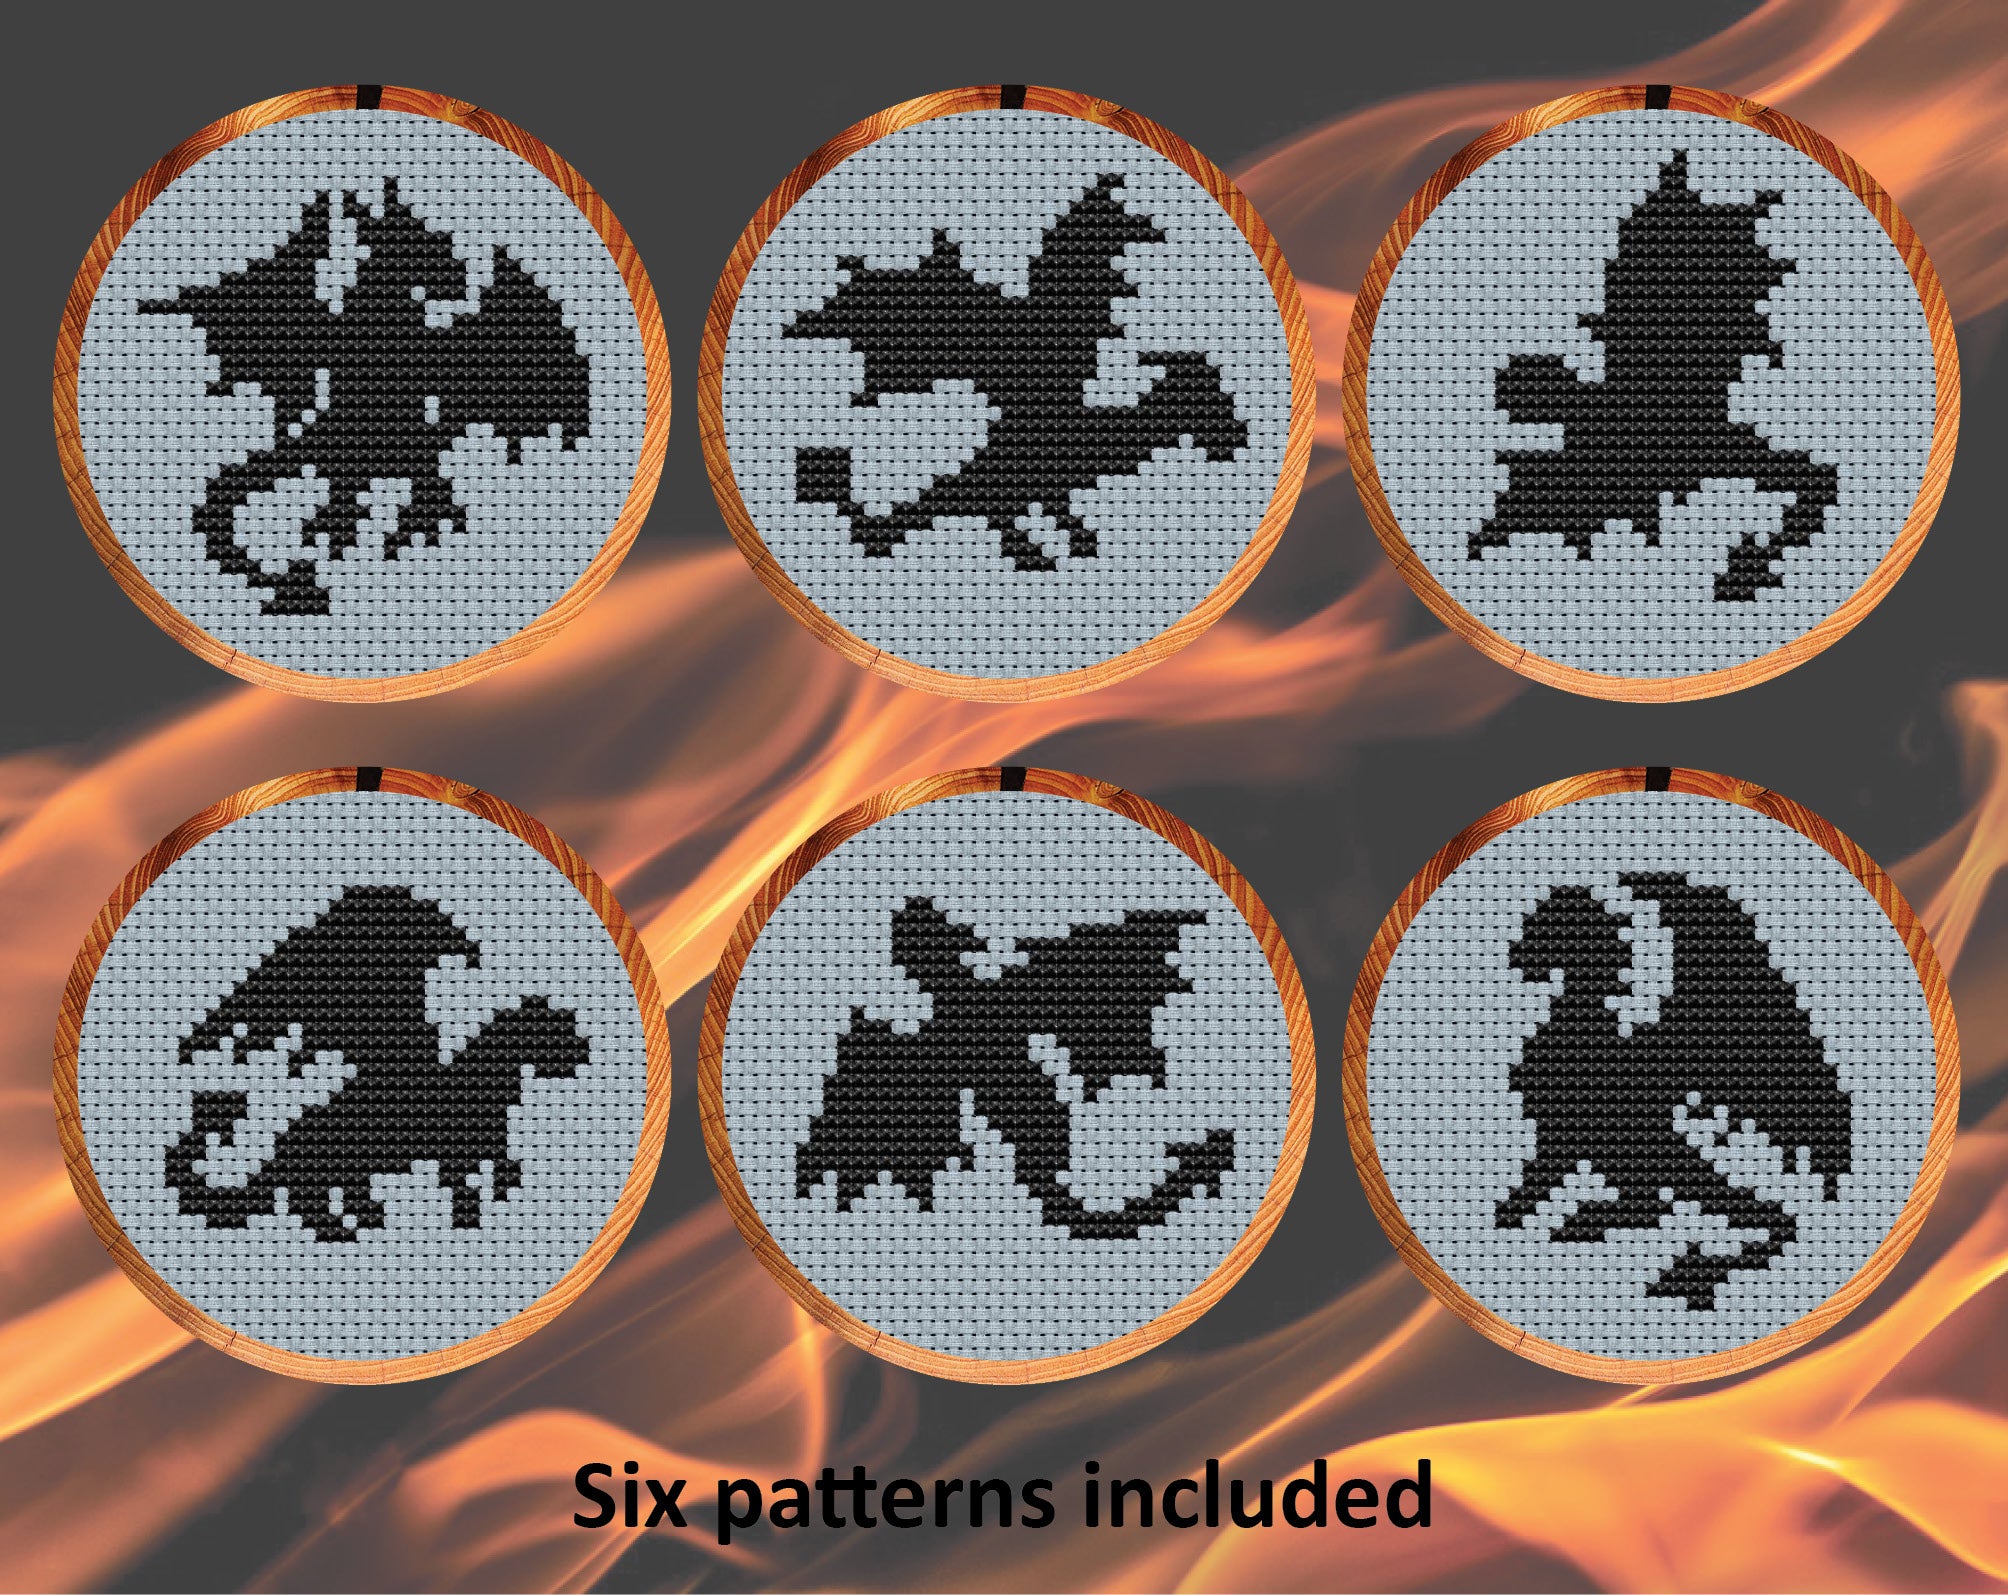 Dragon Silhouettes cross stitch patterns. Six patterns included.